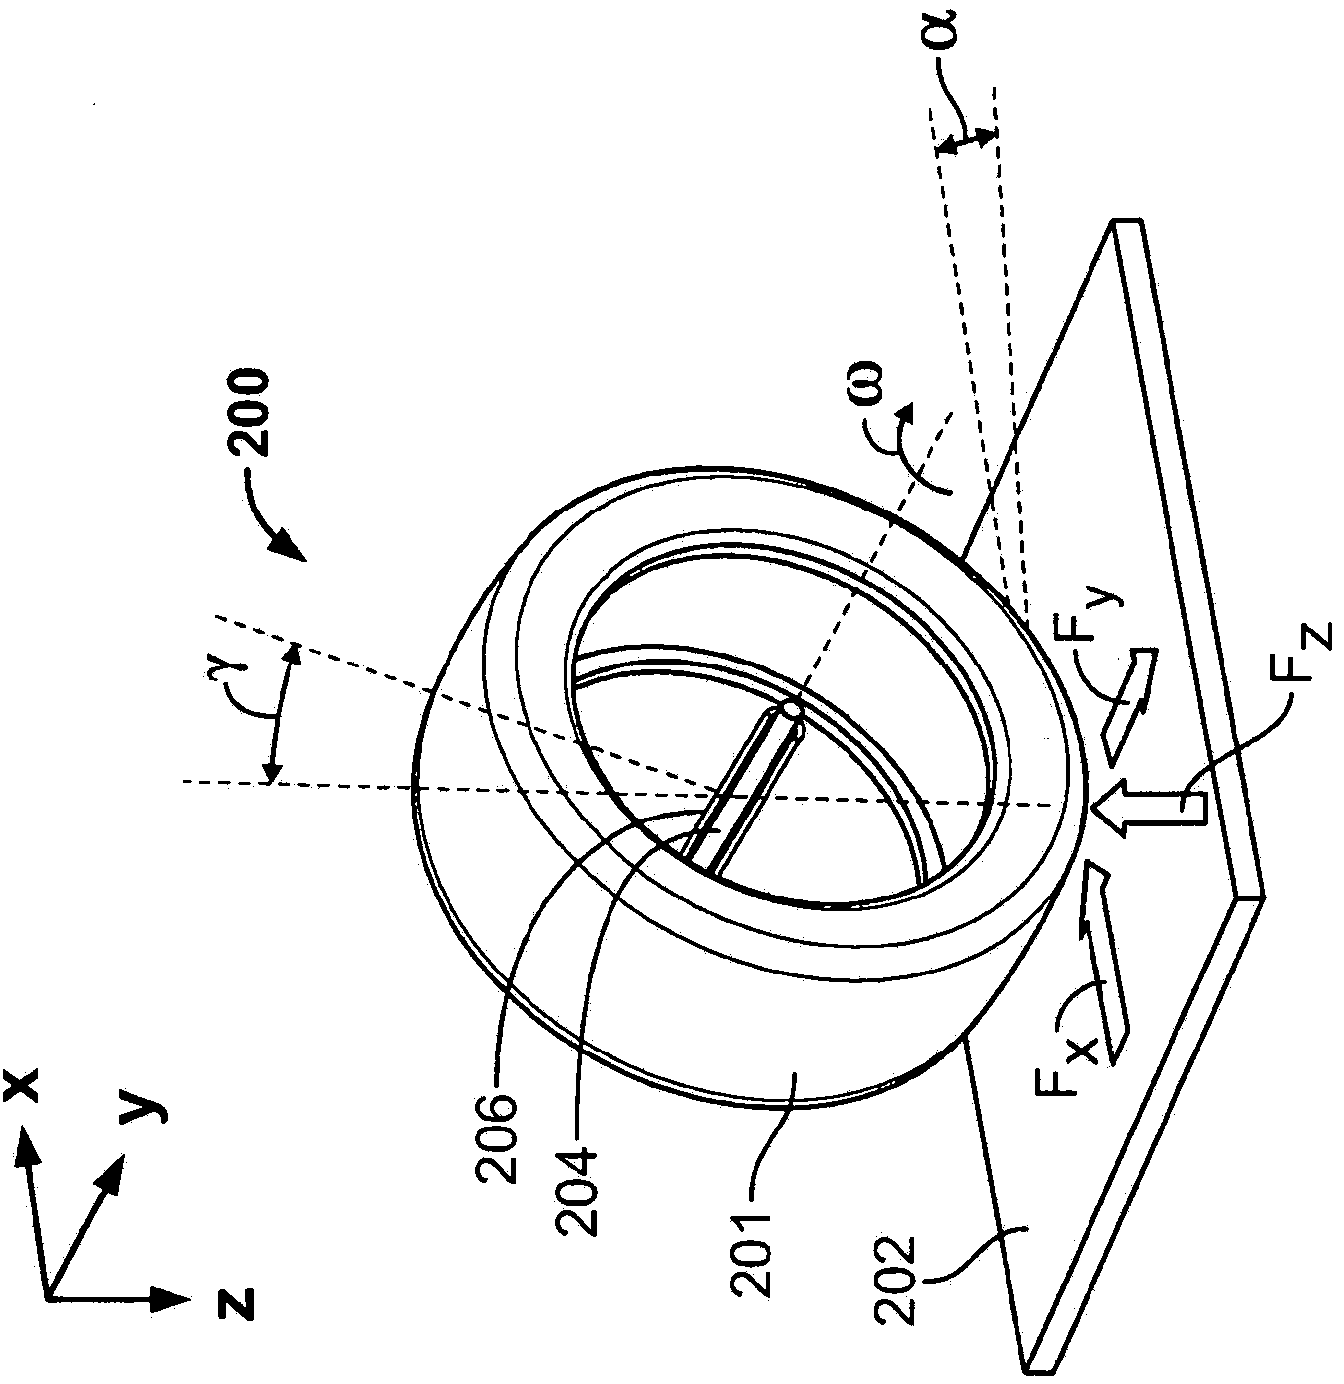 System and method for steady state simulation of rolling tire